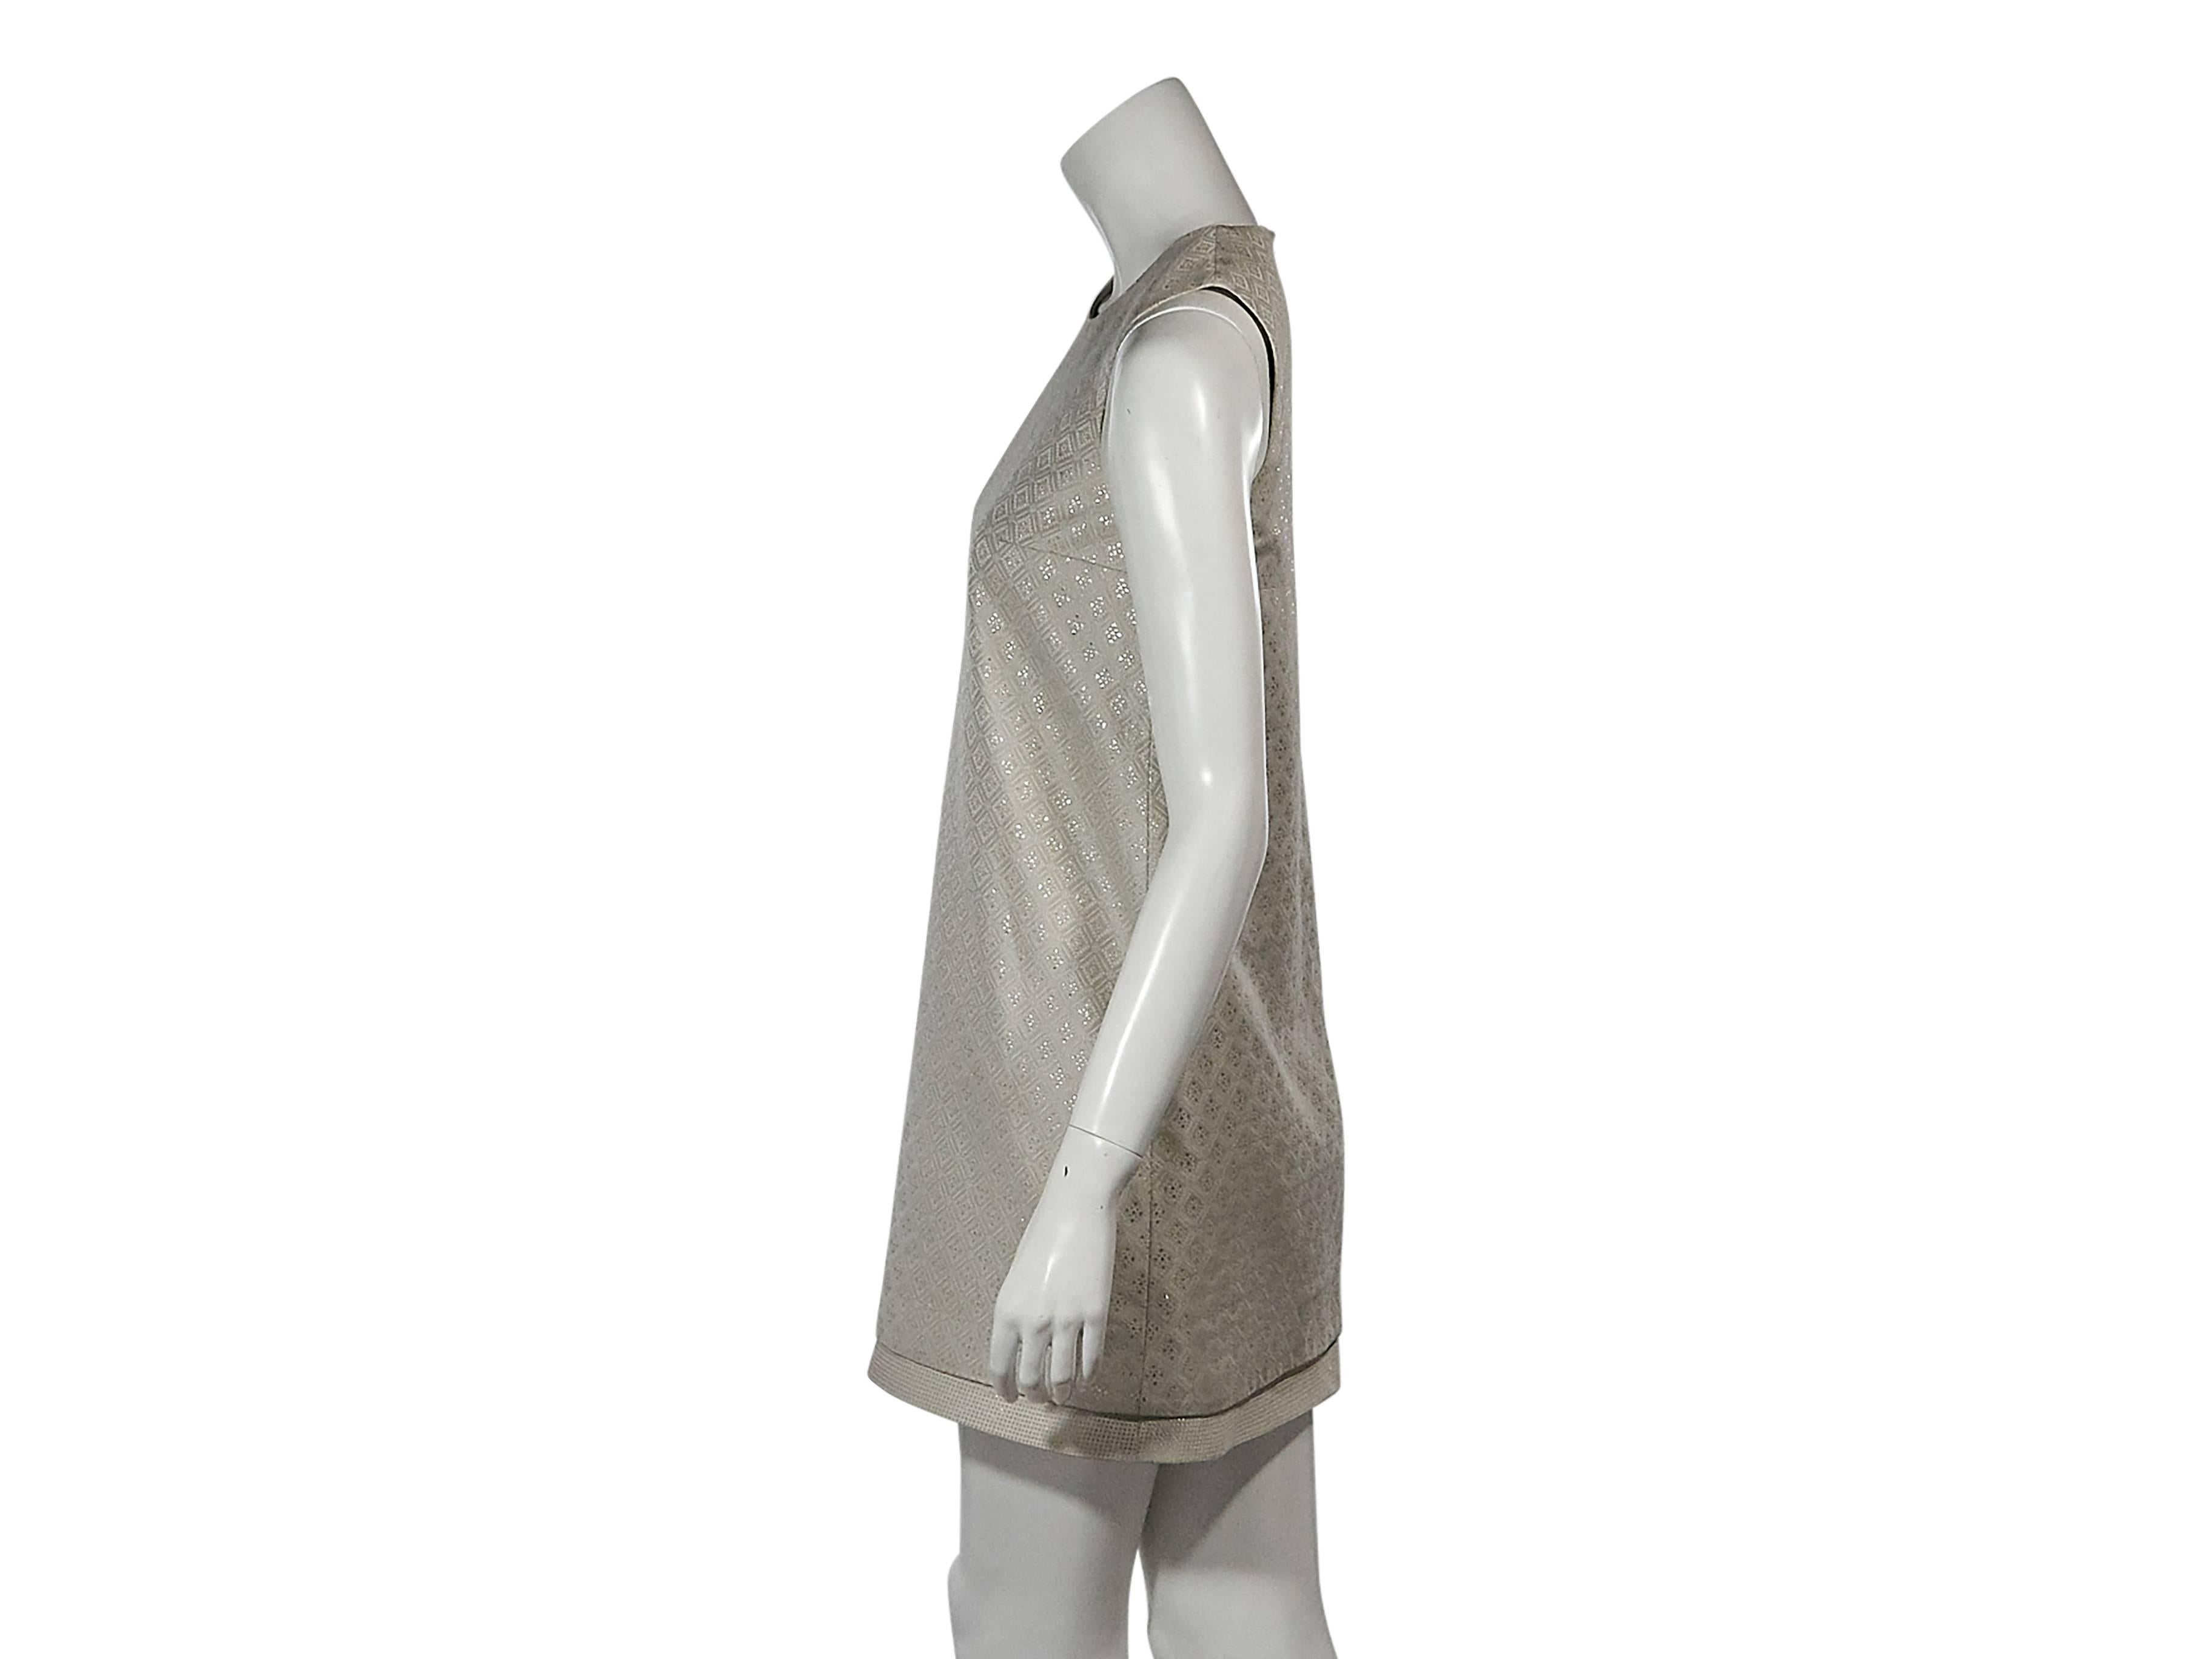 Product details:  Metallic beige shift dress by Gucci.  Jewelneck.  Sleeveless.  Concealed back zip closure.  Size 2
Condition: Pre-owned. Very good.

Est. Retail $ 898.00